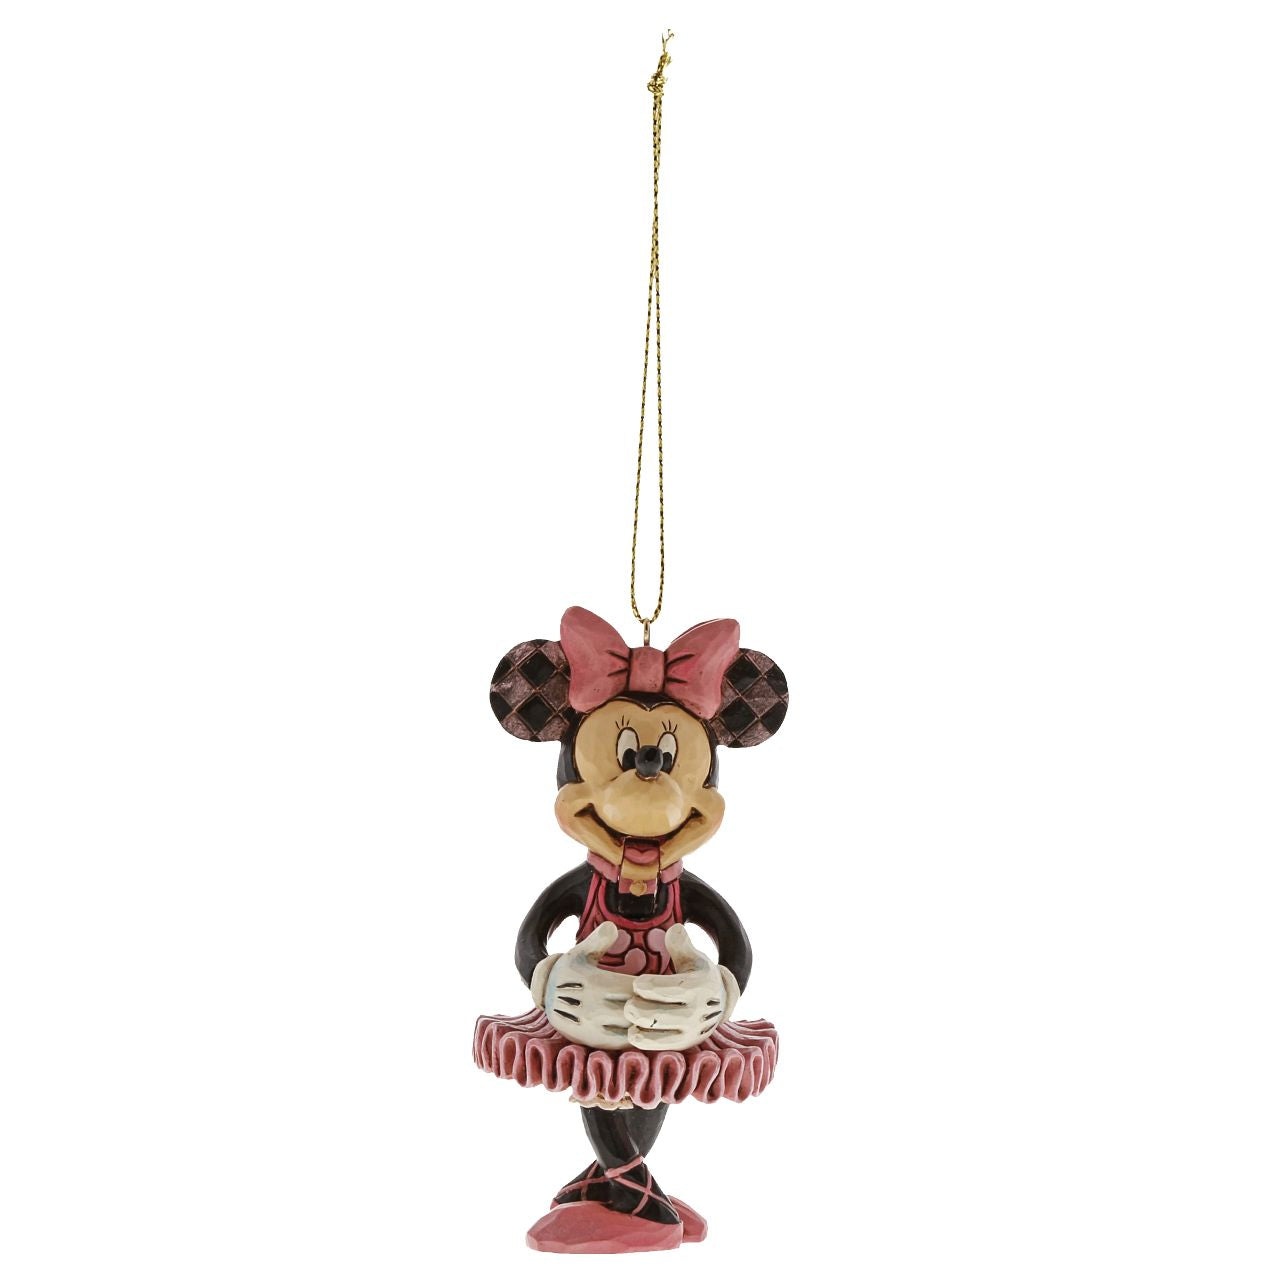 Disney Minnie Mouse Nutcracker Hanging Decoration  Minnie Mouse is ready to make her debut in the Christmas classic, The Nutcracker. Handcrafted and hand-painted, this timeless ornament features Jim Shore's signature folk art motifs and playful use of colour.